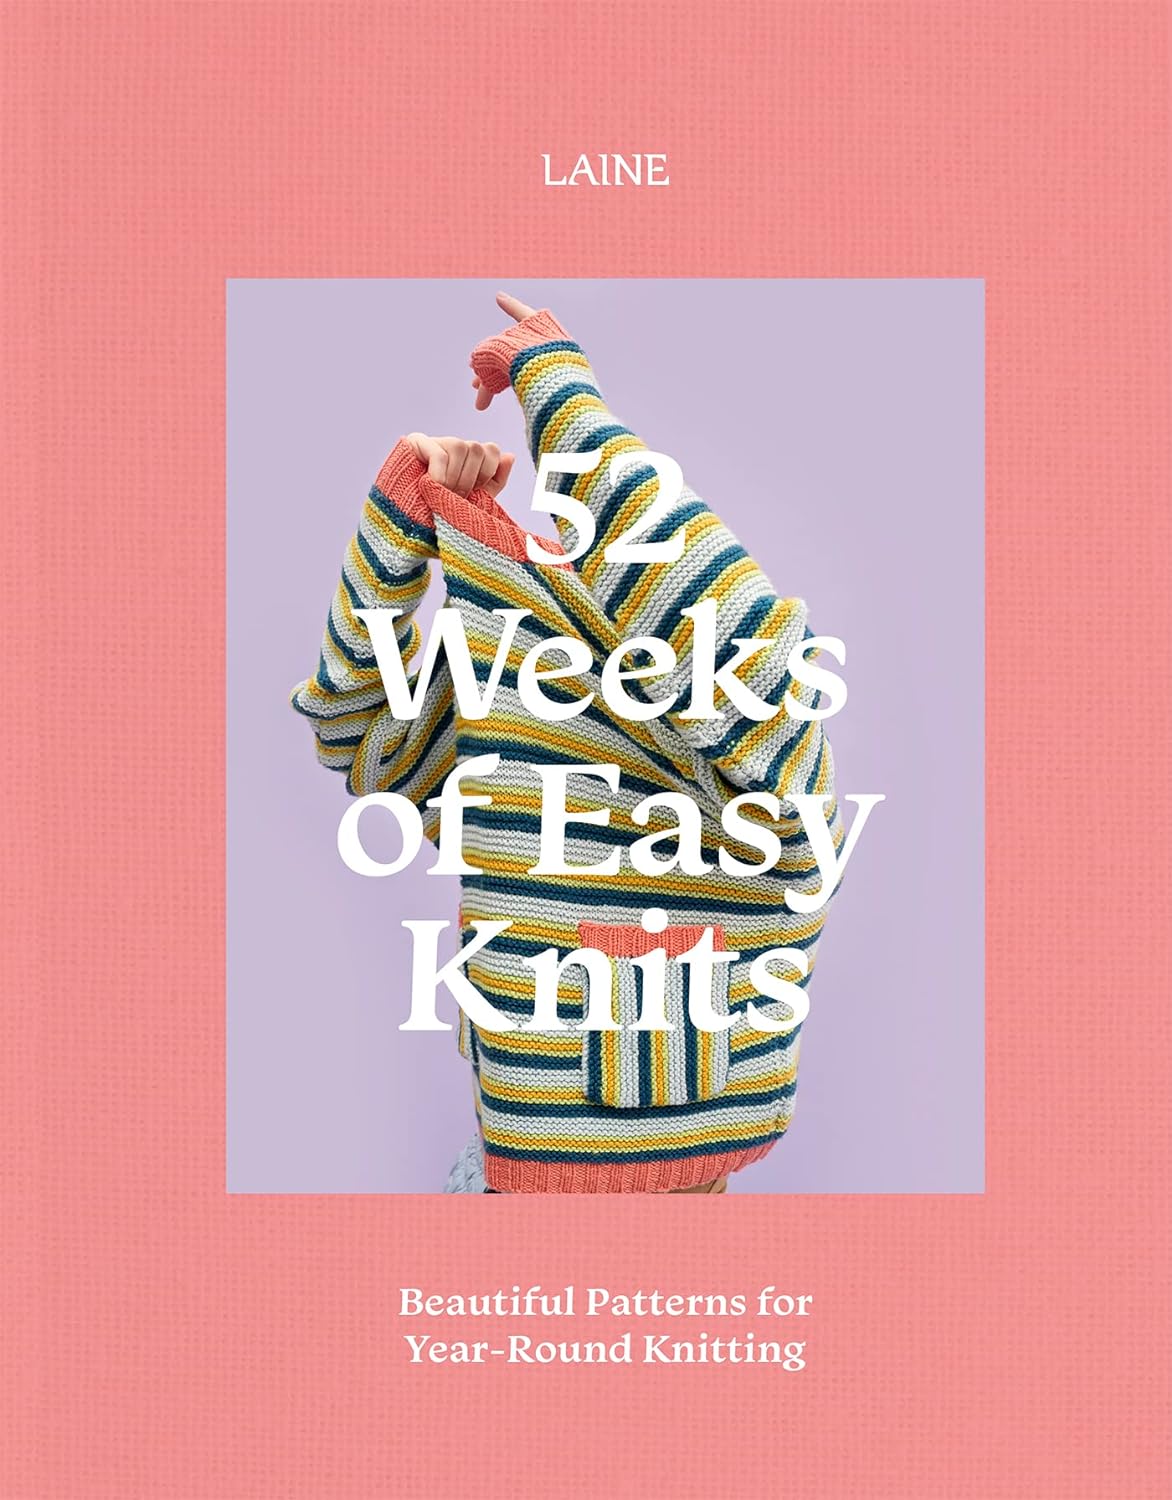 52 Weeks of Easy Knits - Soft cover book